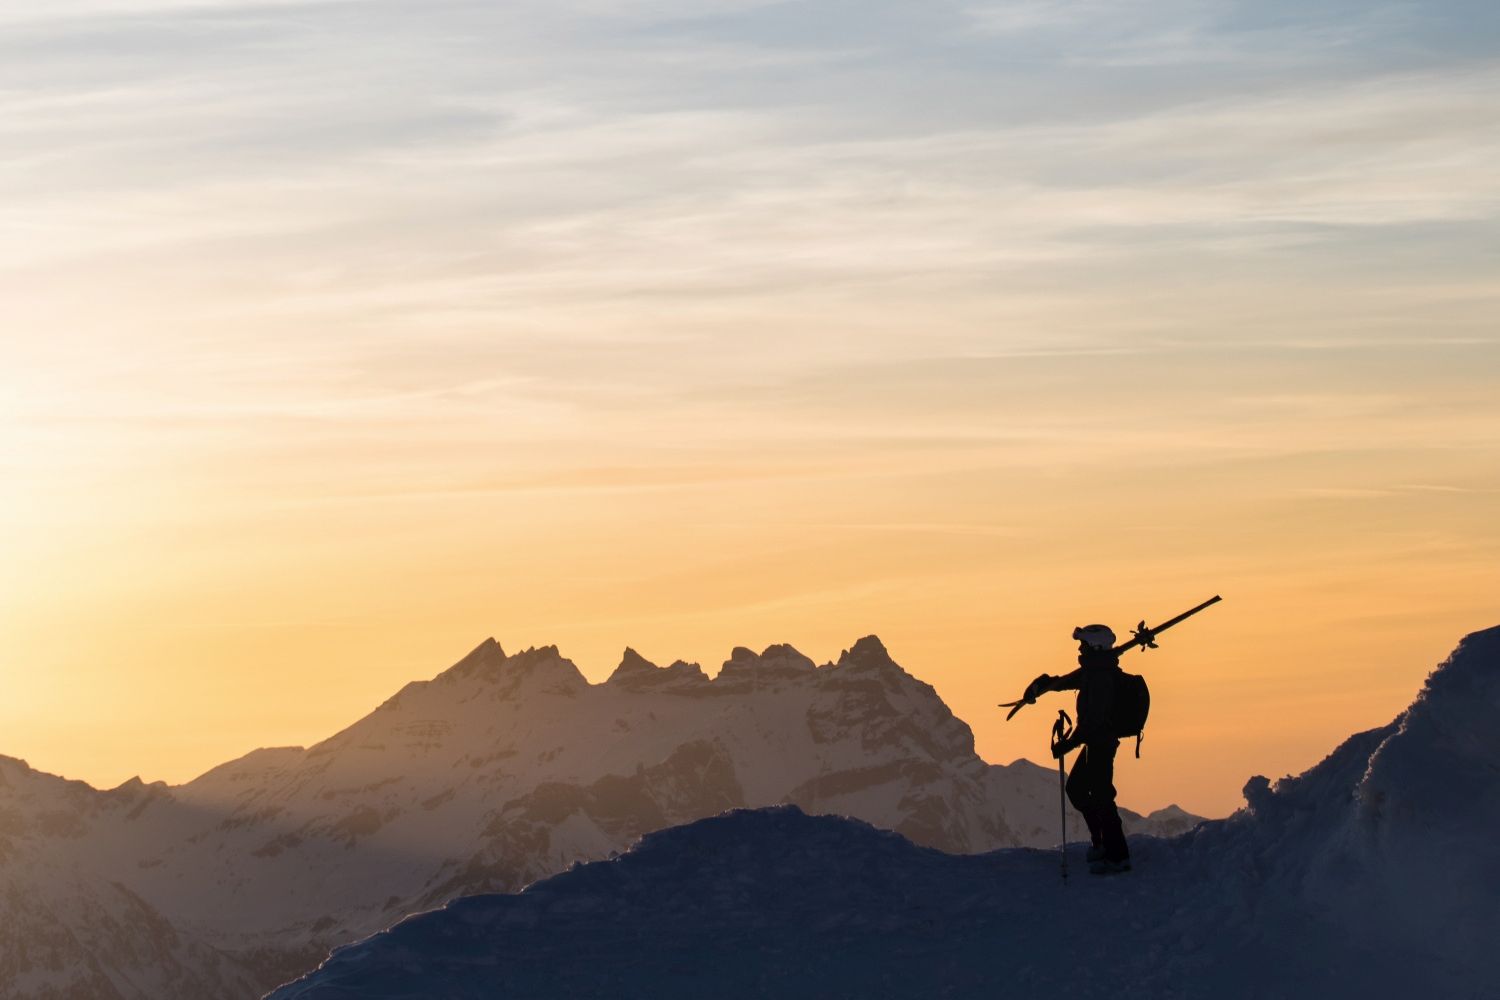 Skier looking over mountains on a sunset ski tour